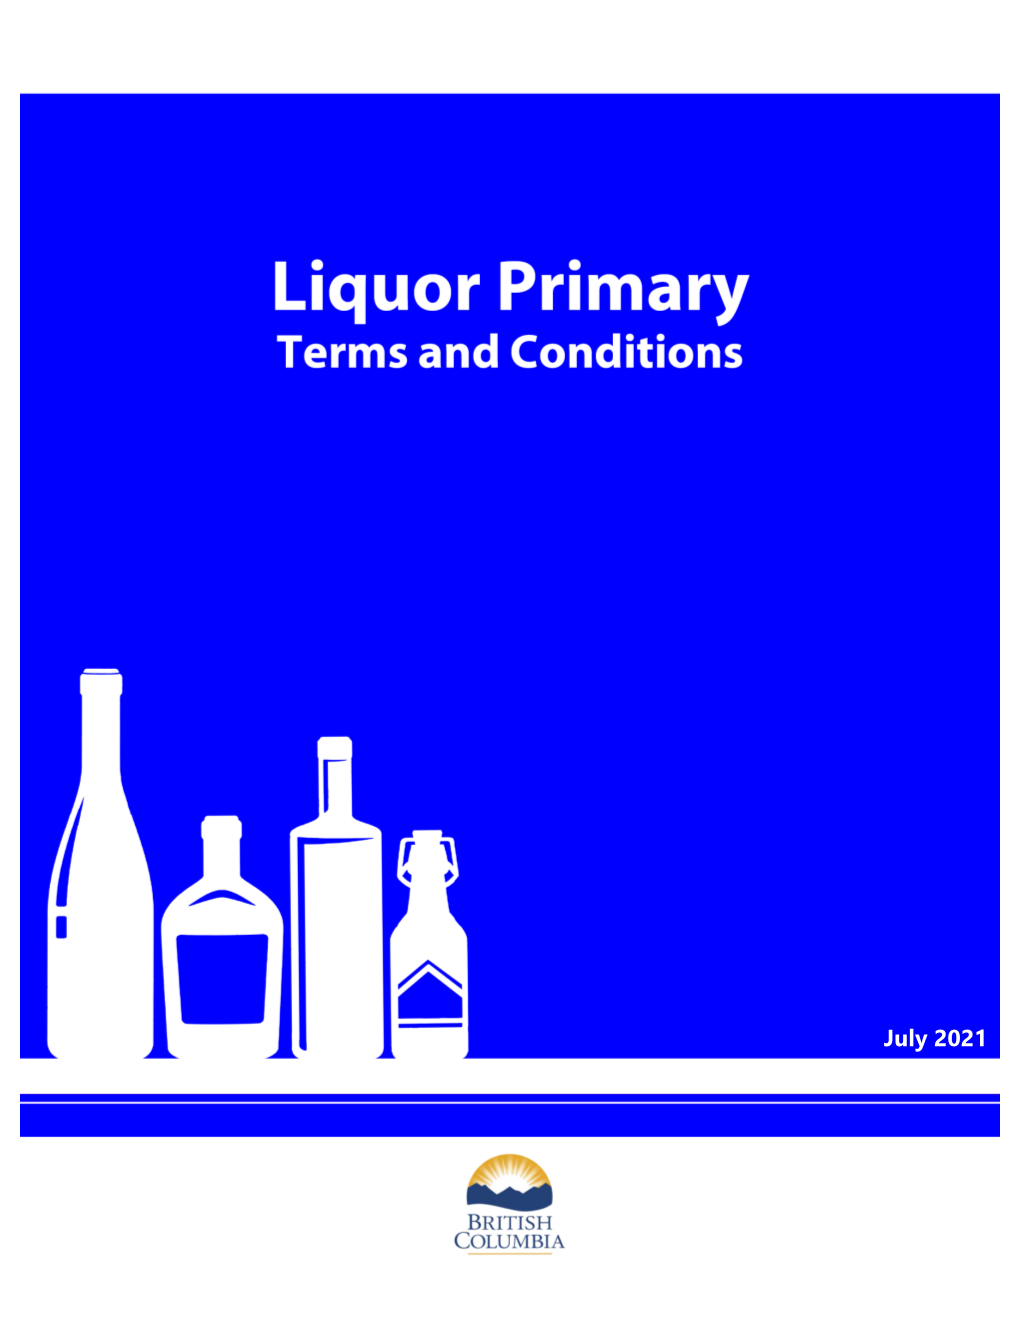 Liquor Primary Licence Terms & Conditions